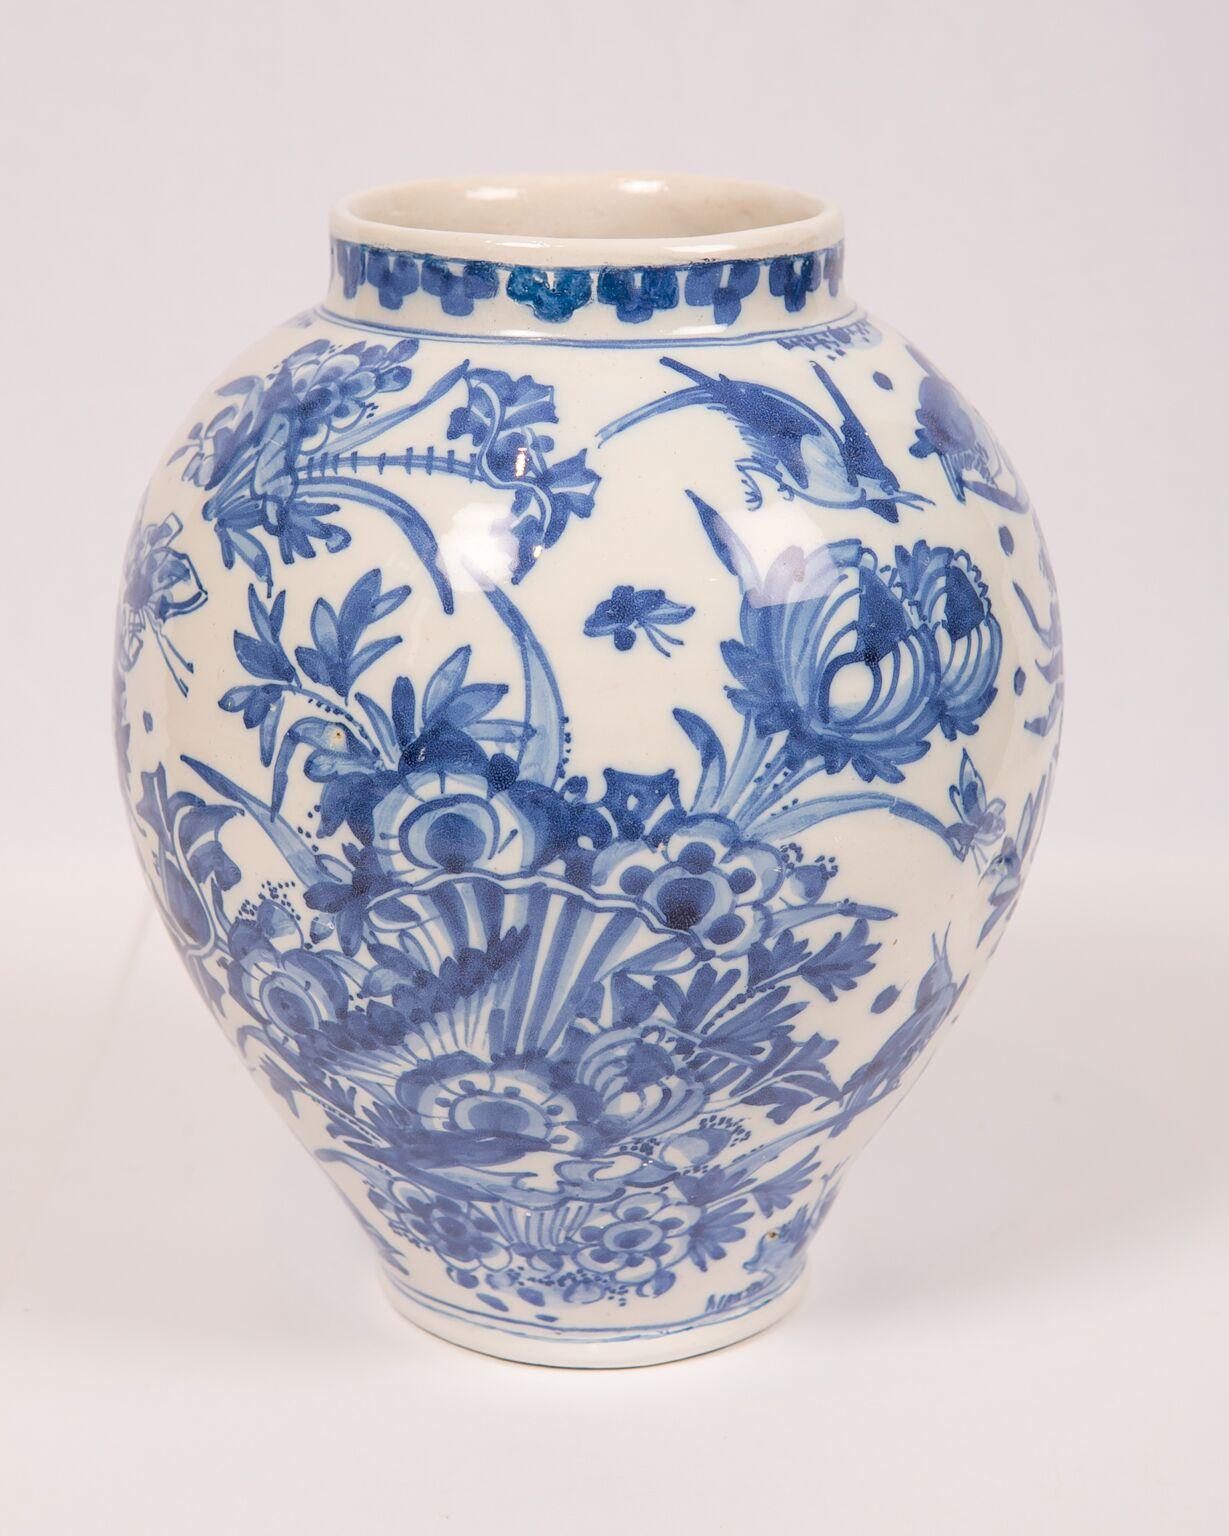 London Delftware Blue and White Flower Vase 17th Century circa 1685 2